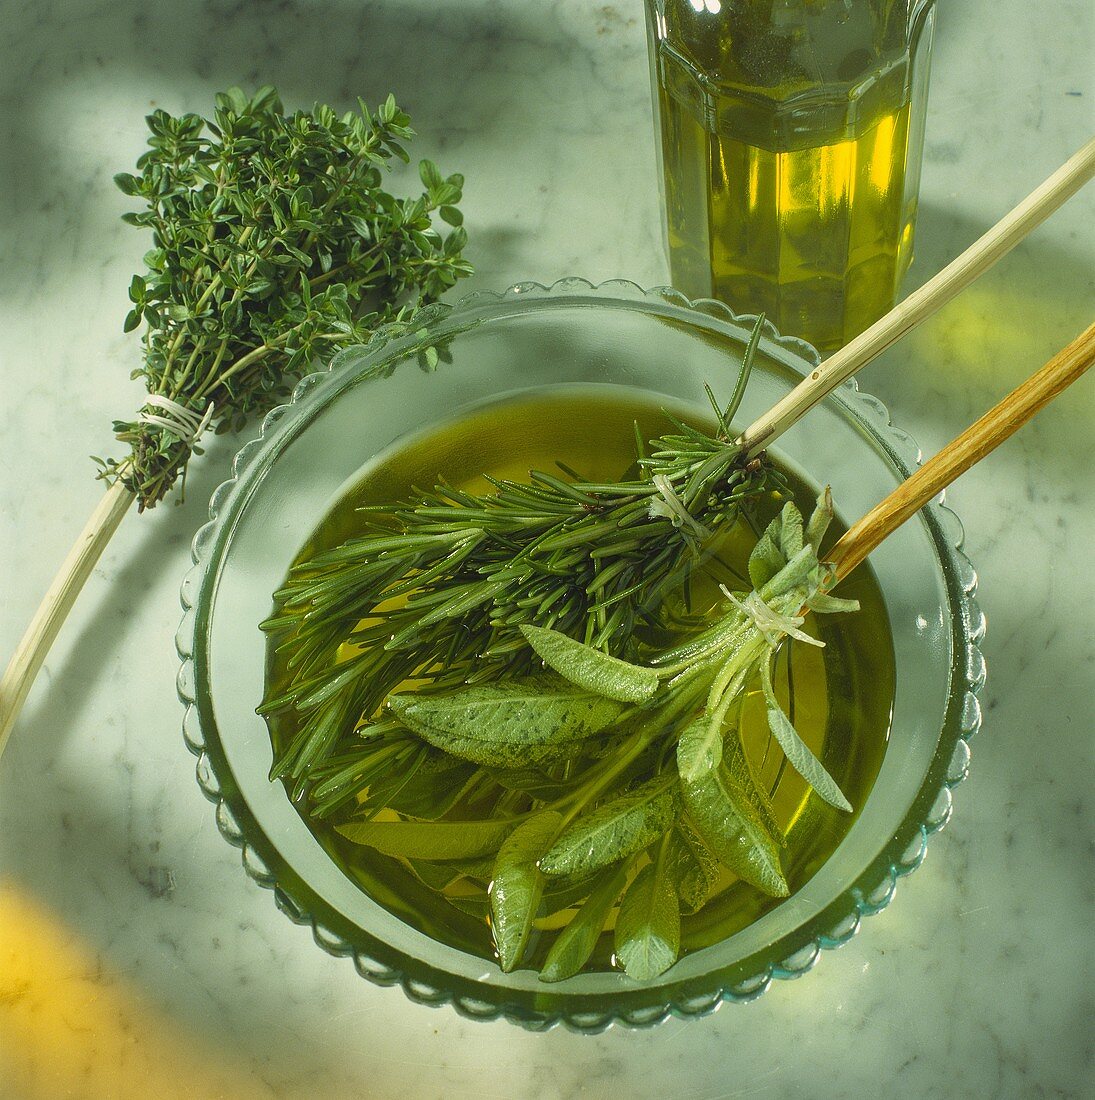 Herb paintbrushes (sage, rosemary) in bowls of olive oil